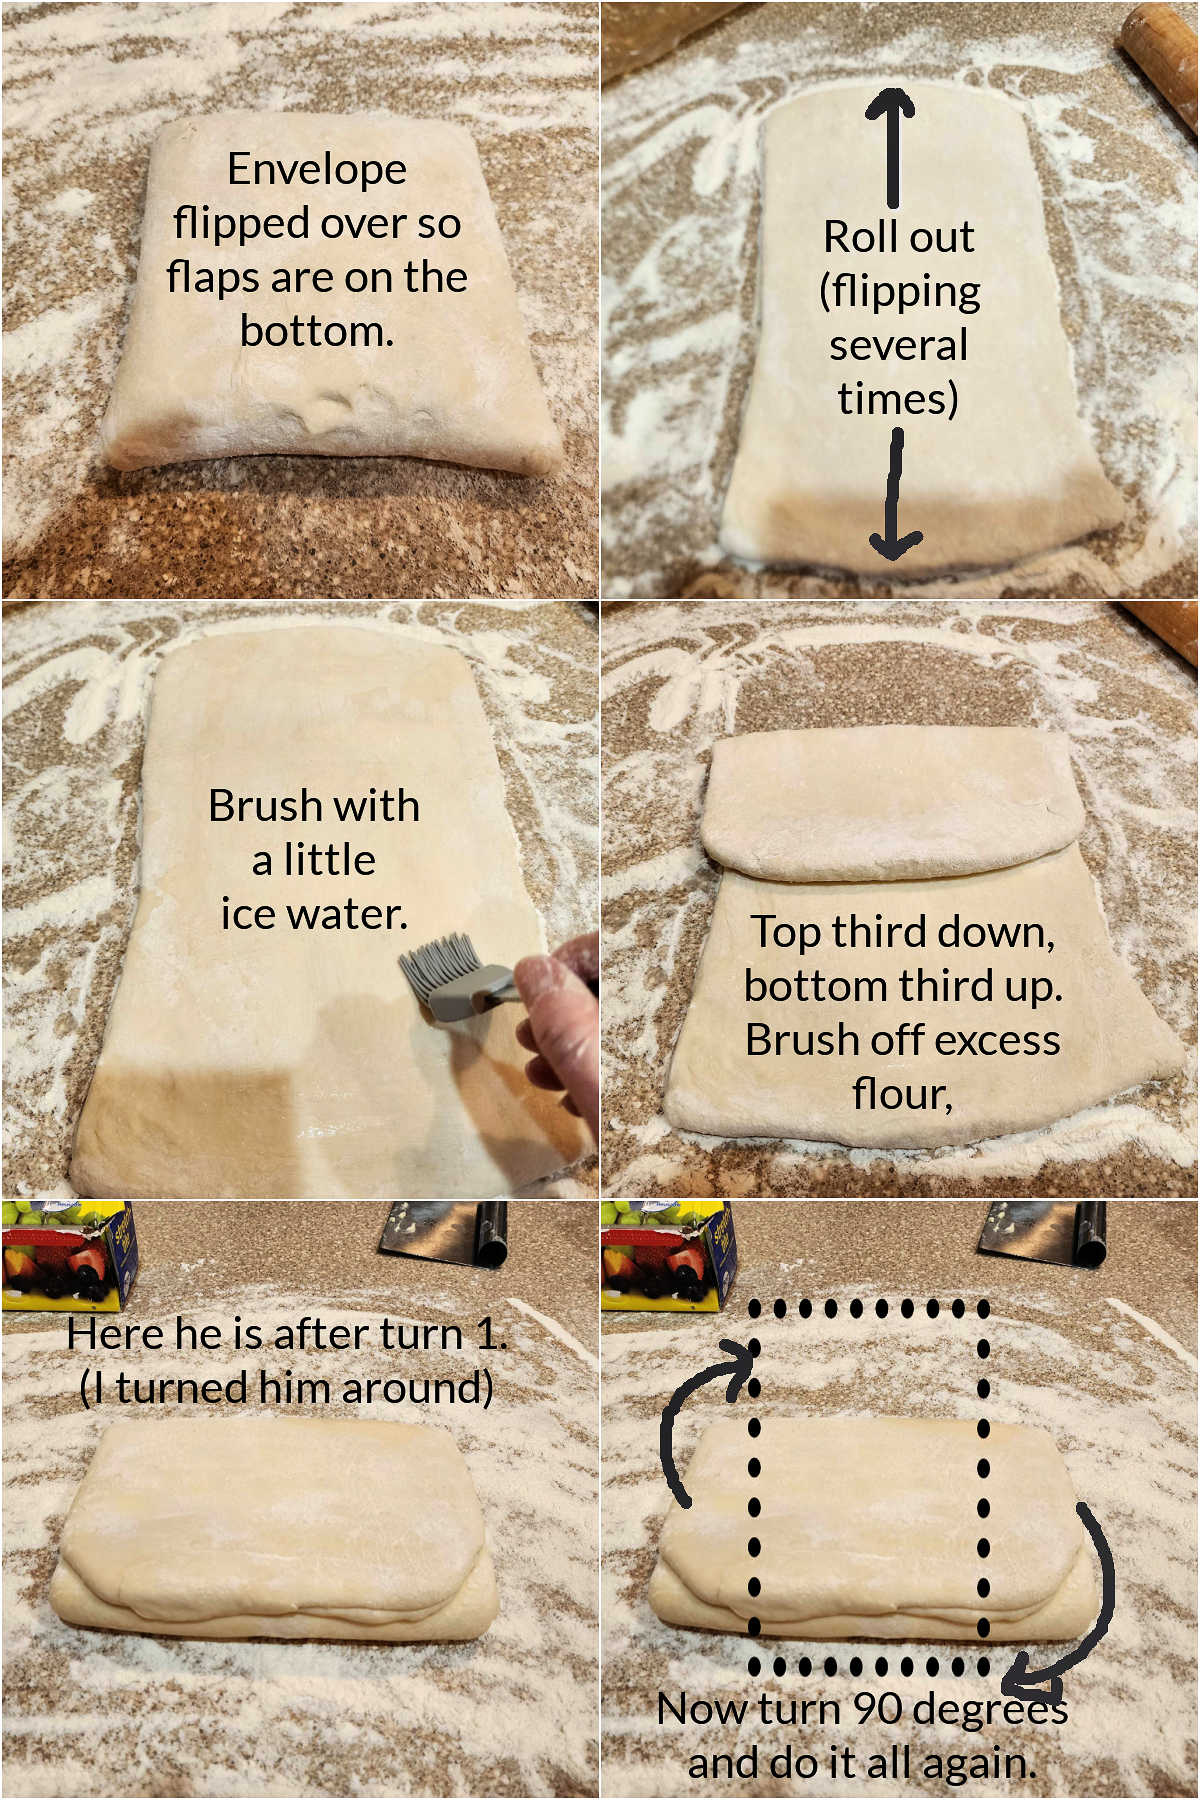 A collage of 6 images showing how to do one turn in making puff pastry: rolling the dough into a long rectangle, folding it into thirds, and giving it a quarter turn before doing it all again.